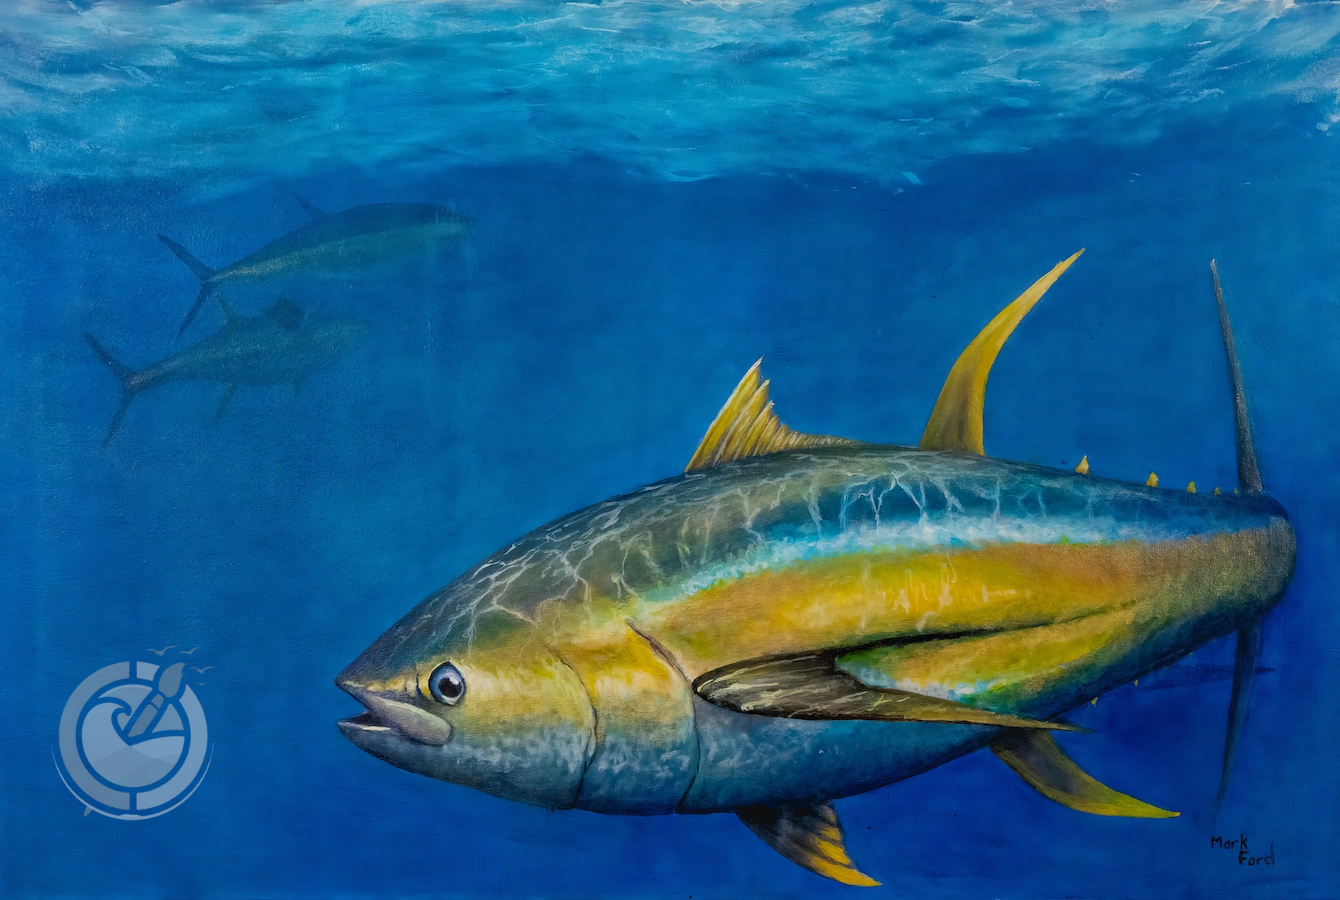 Yellowfin tuna is a highly regarded and sought-after species of fish found in warm and temperate waters around the world's oceans.